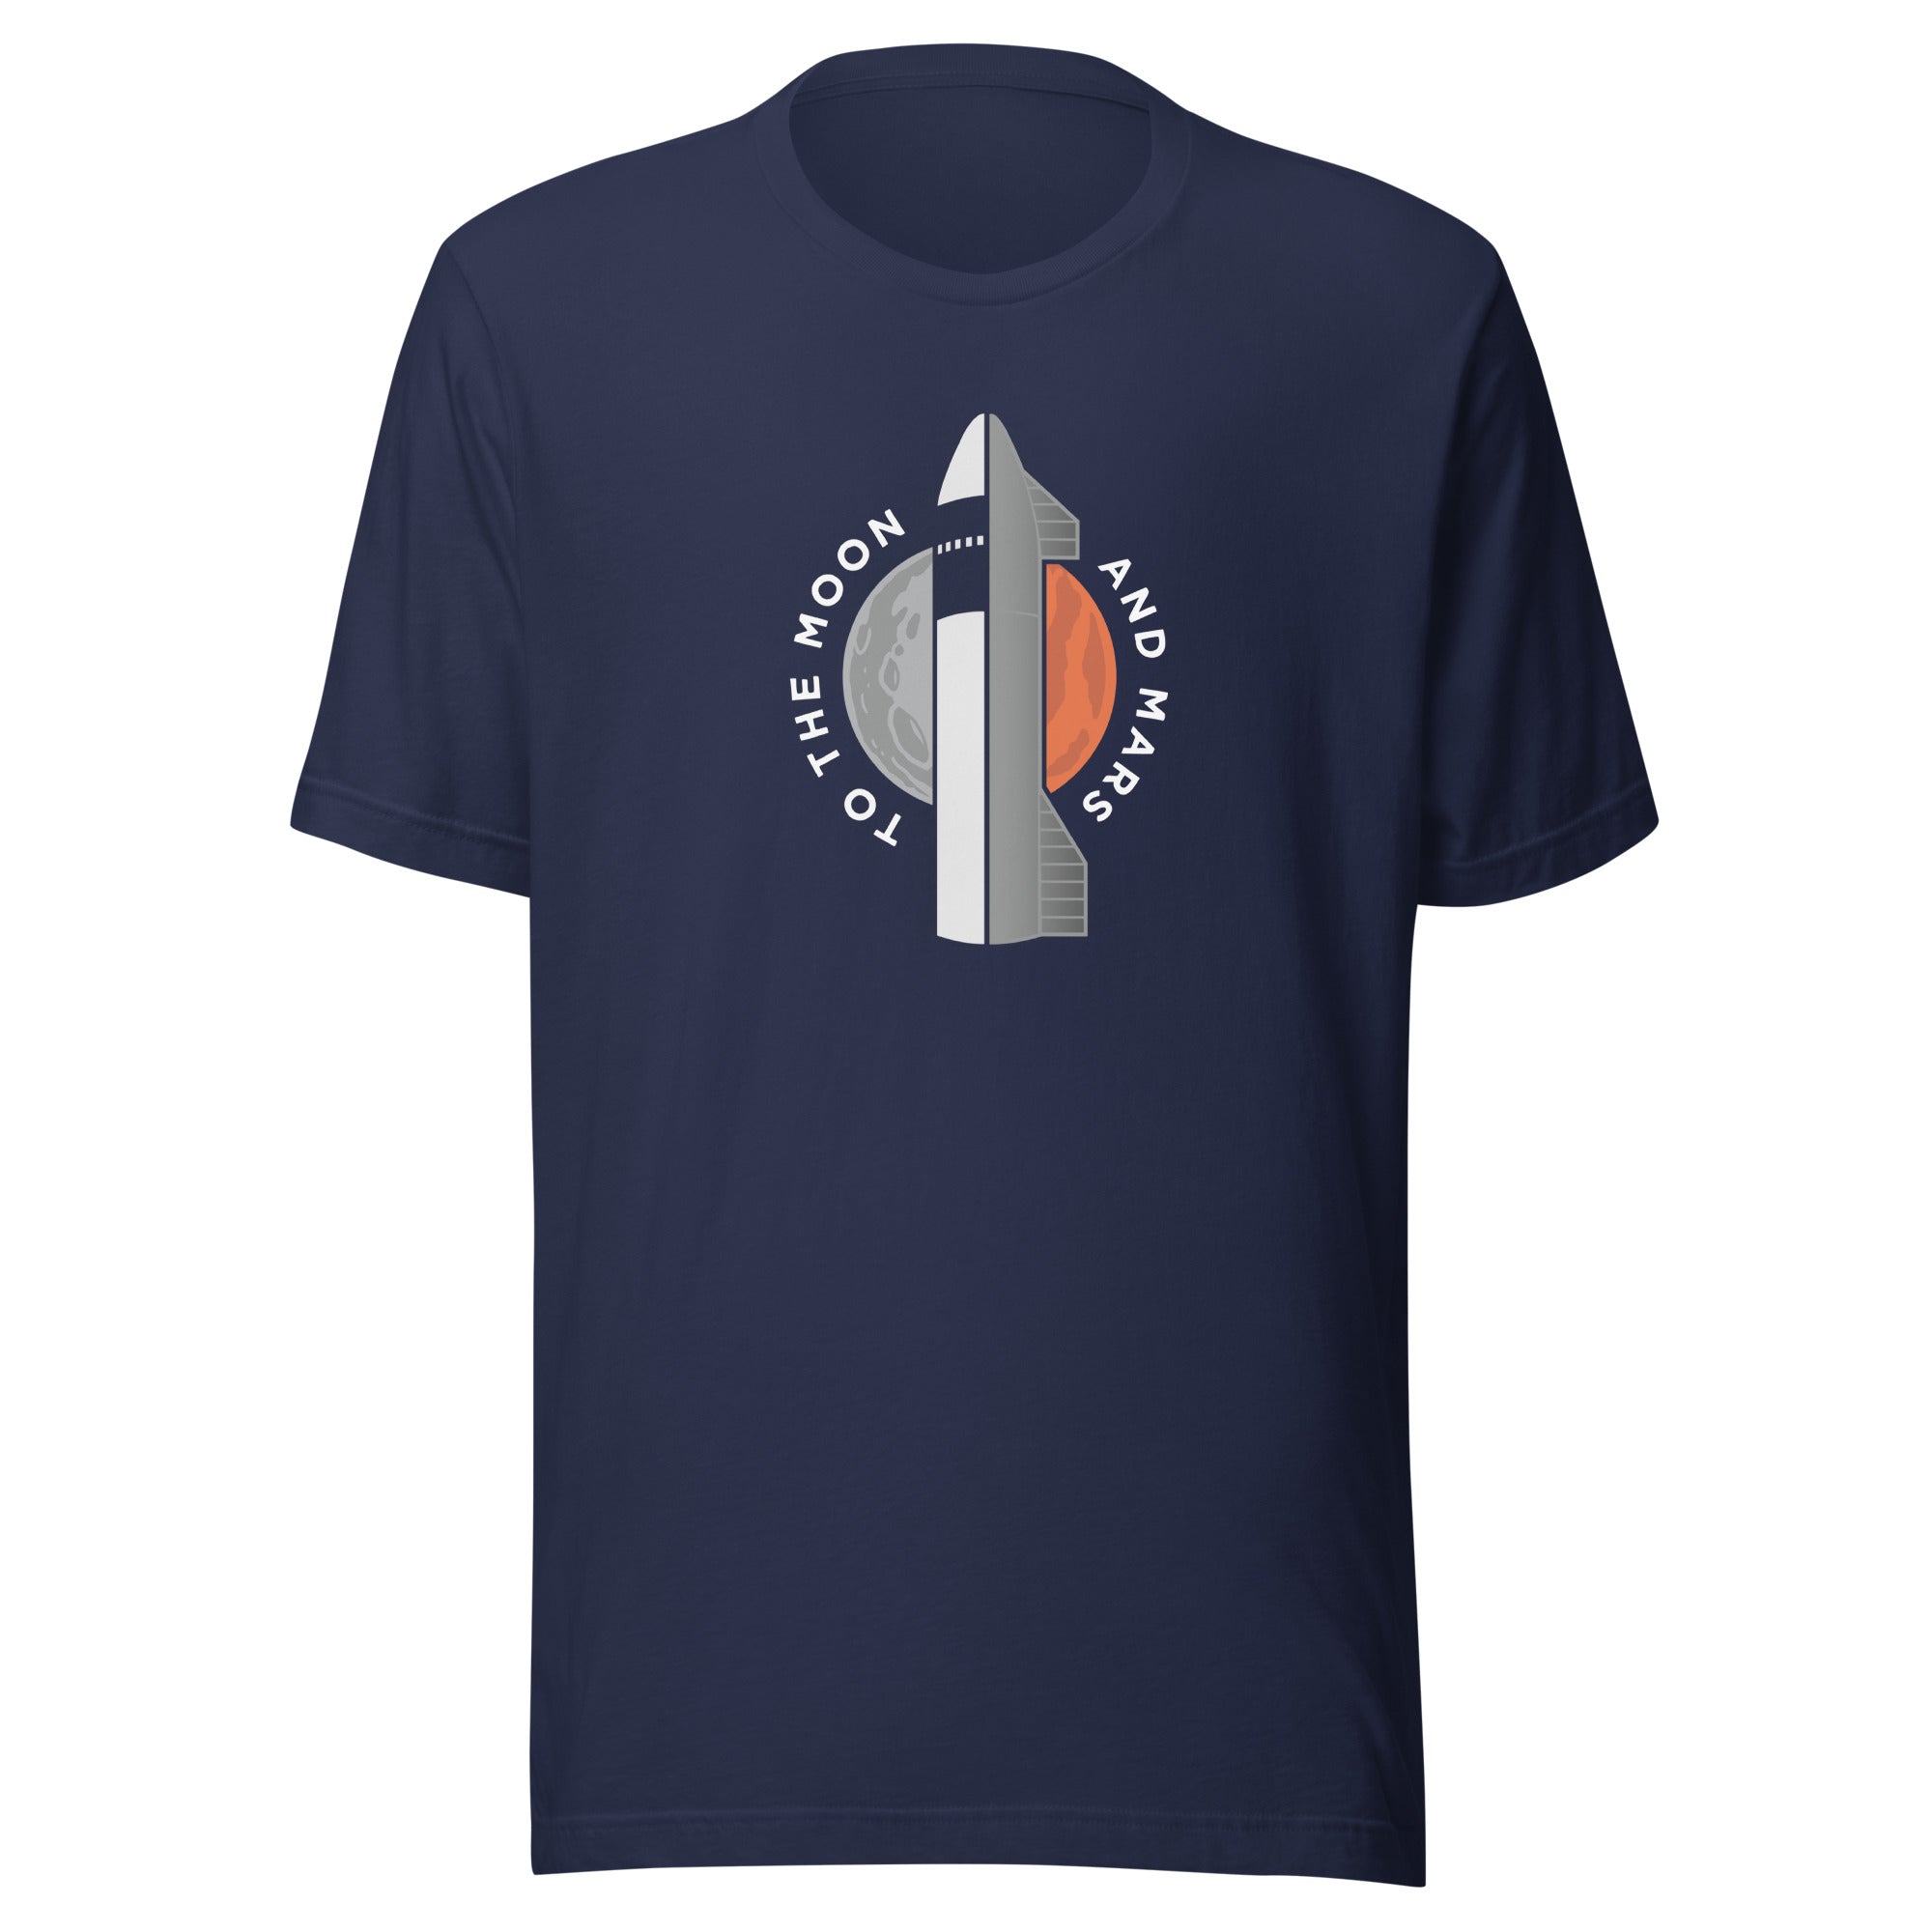 To the Moon and Mars - Unisex t-shirt